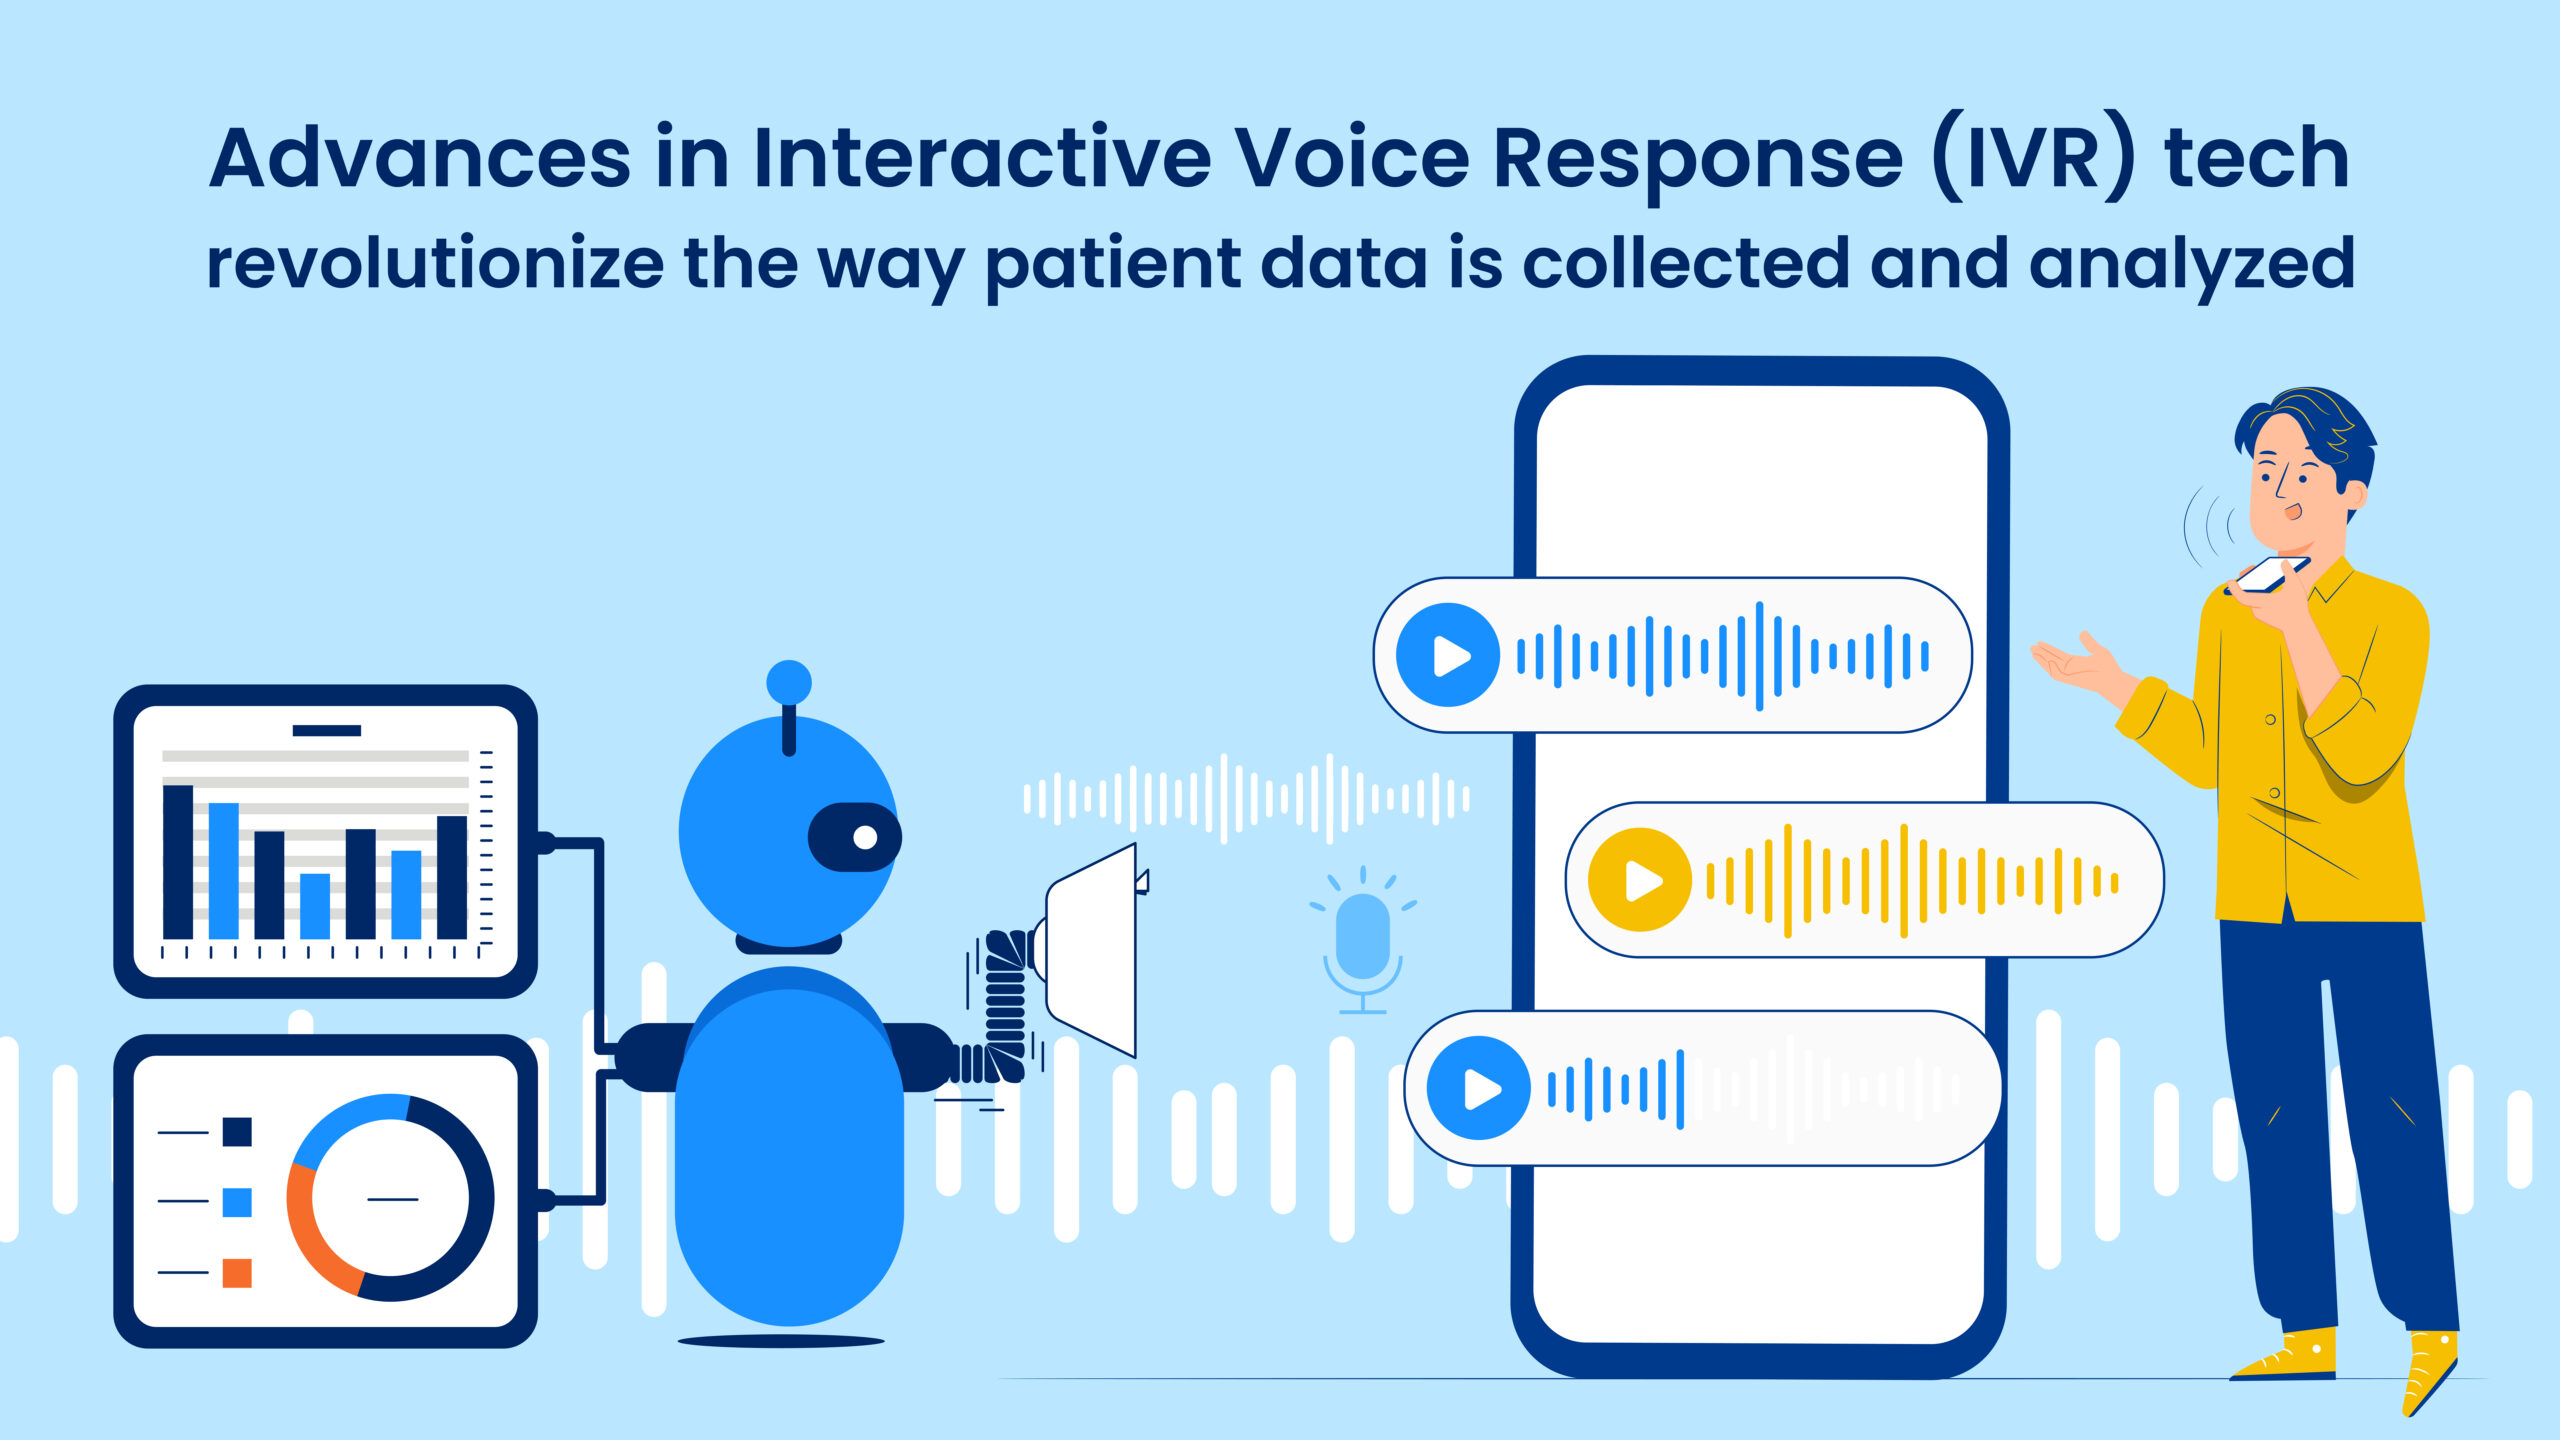 Advances in Interactive Voice Response (IVR) tech promise to revolutionize the way patient data is collected and analyzed